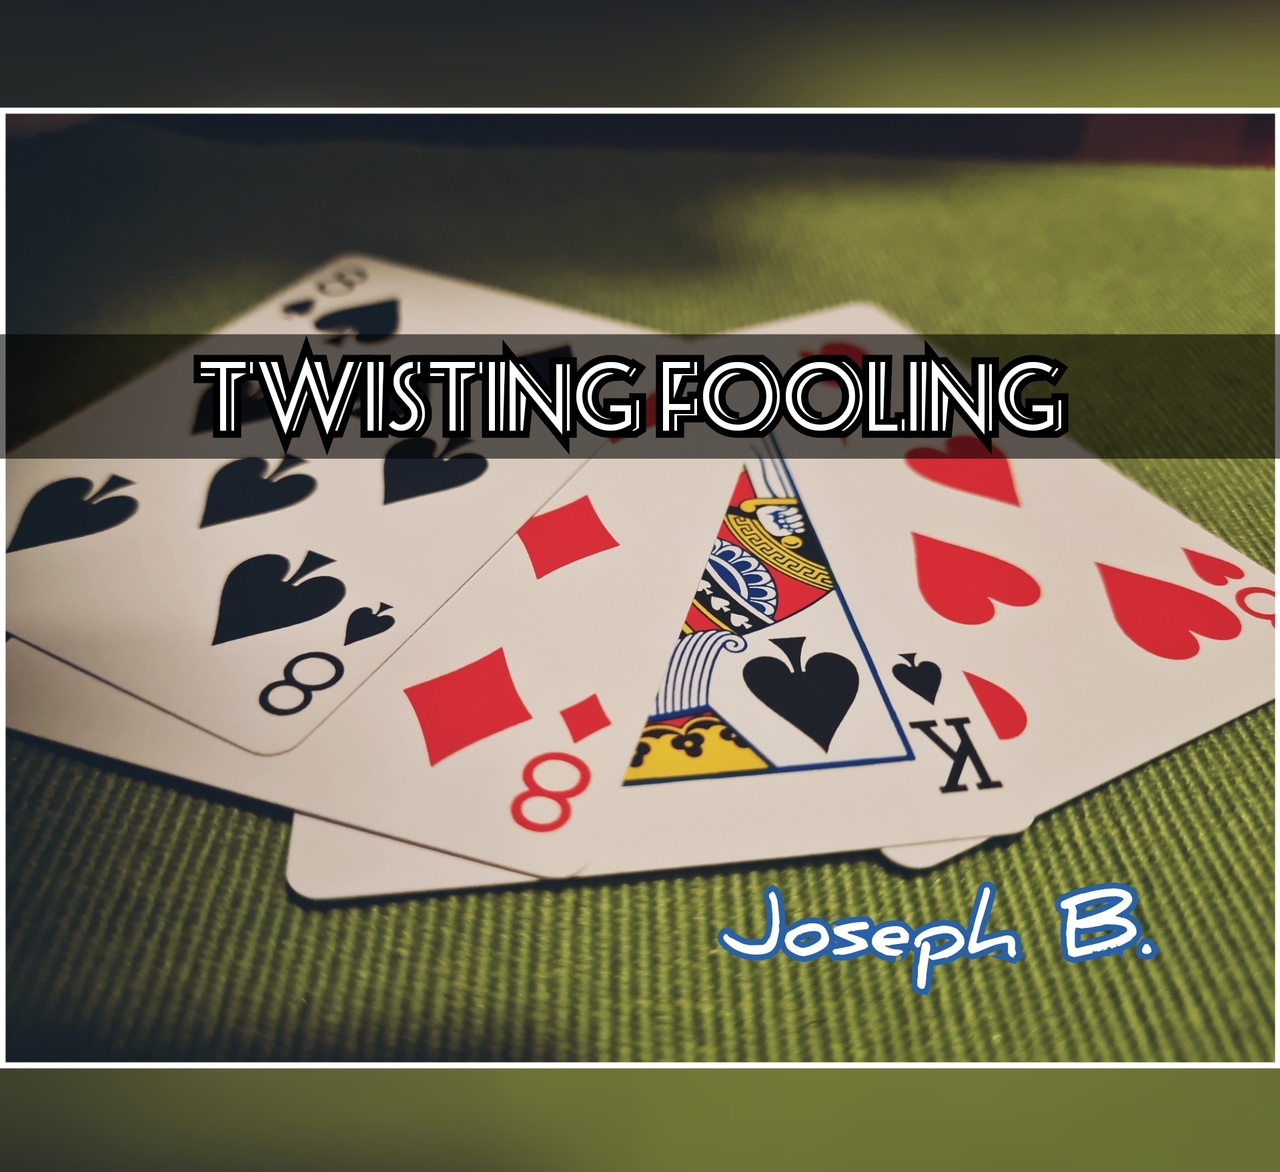 Twisting Fooling by Joseph B. (MP4 Video Download)